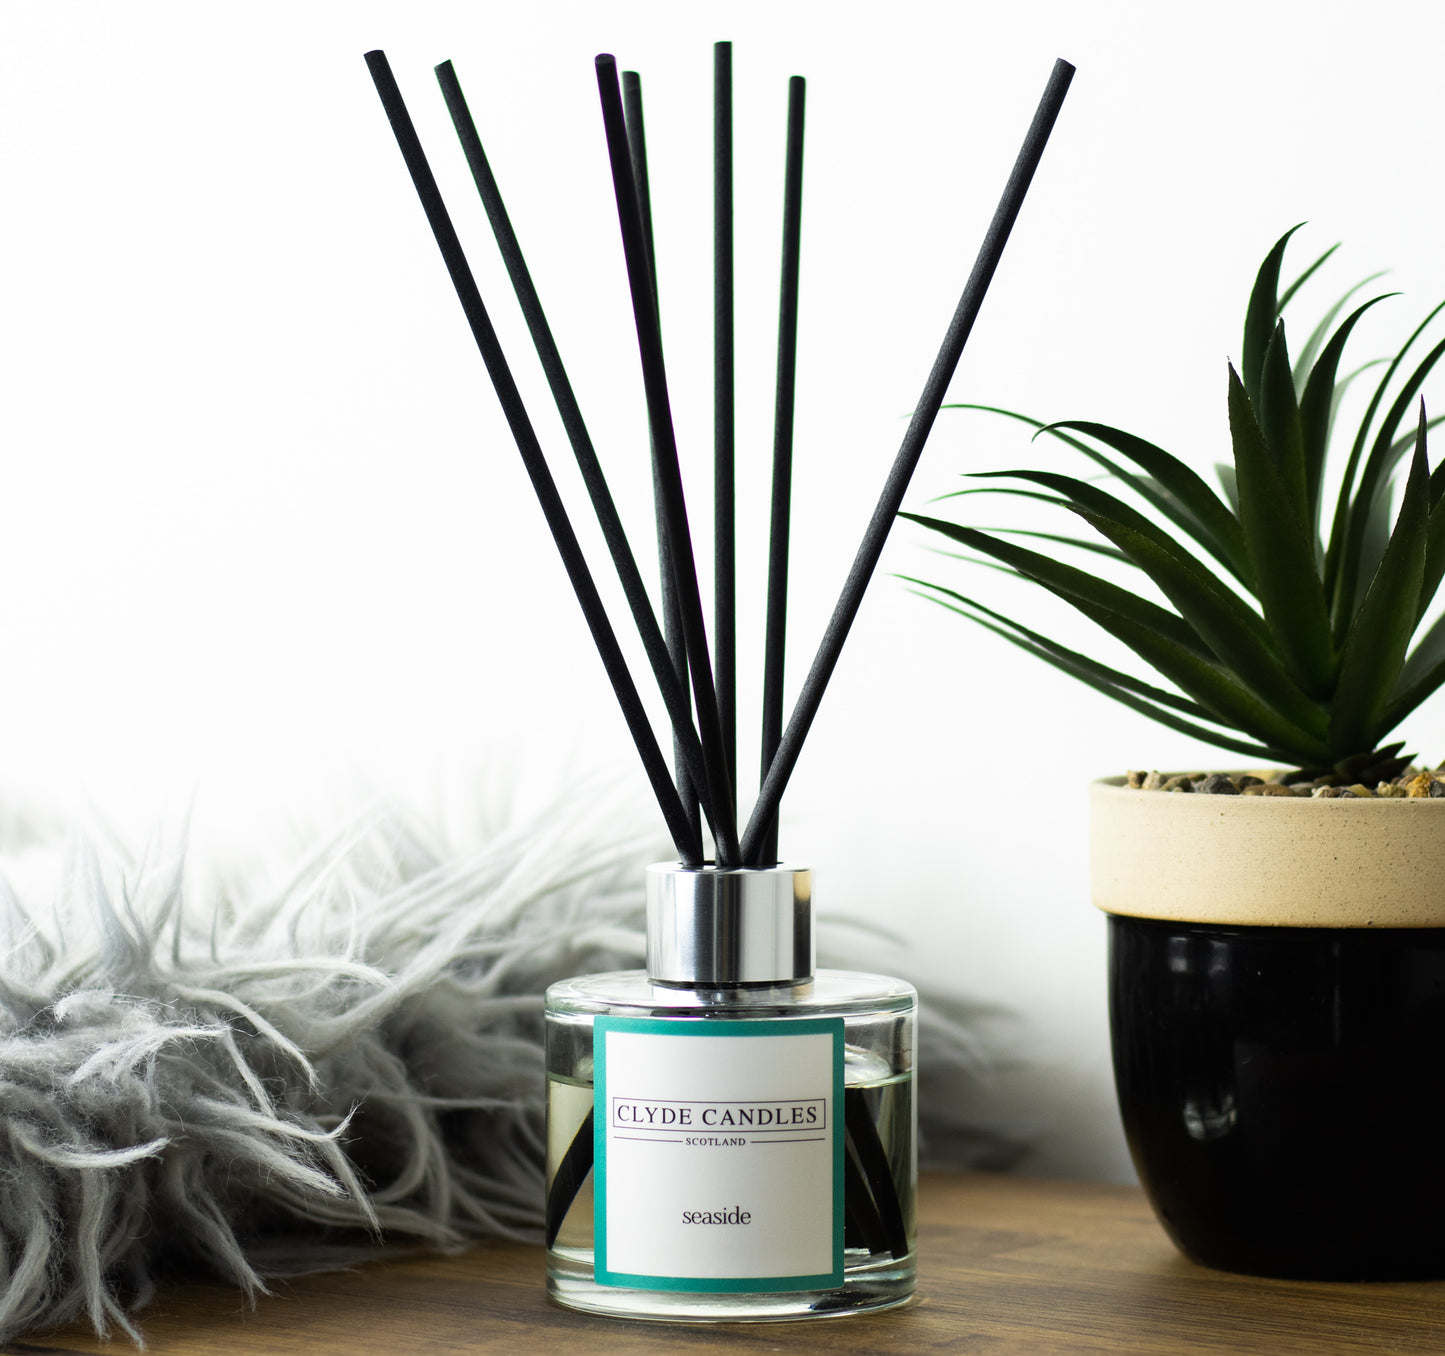 Seaside Reed Diffuser - Clyde Candles, Luxury Diffuser Oil with a Set of 7 Fibre Sticks, 100ml, Best Aroma Scent for Home, Kitchen, Living Room, Bathroom. Fragrance Diffusers set with sticks